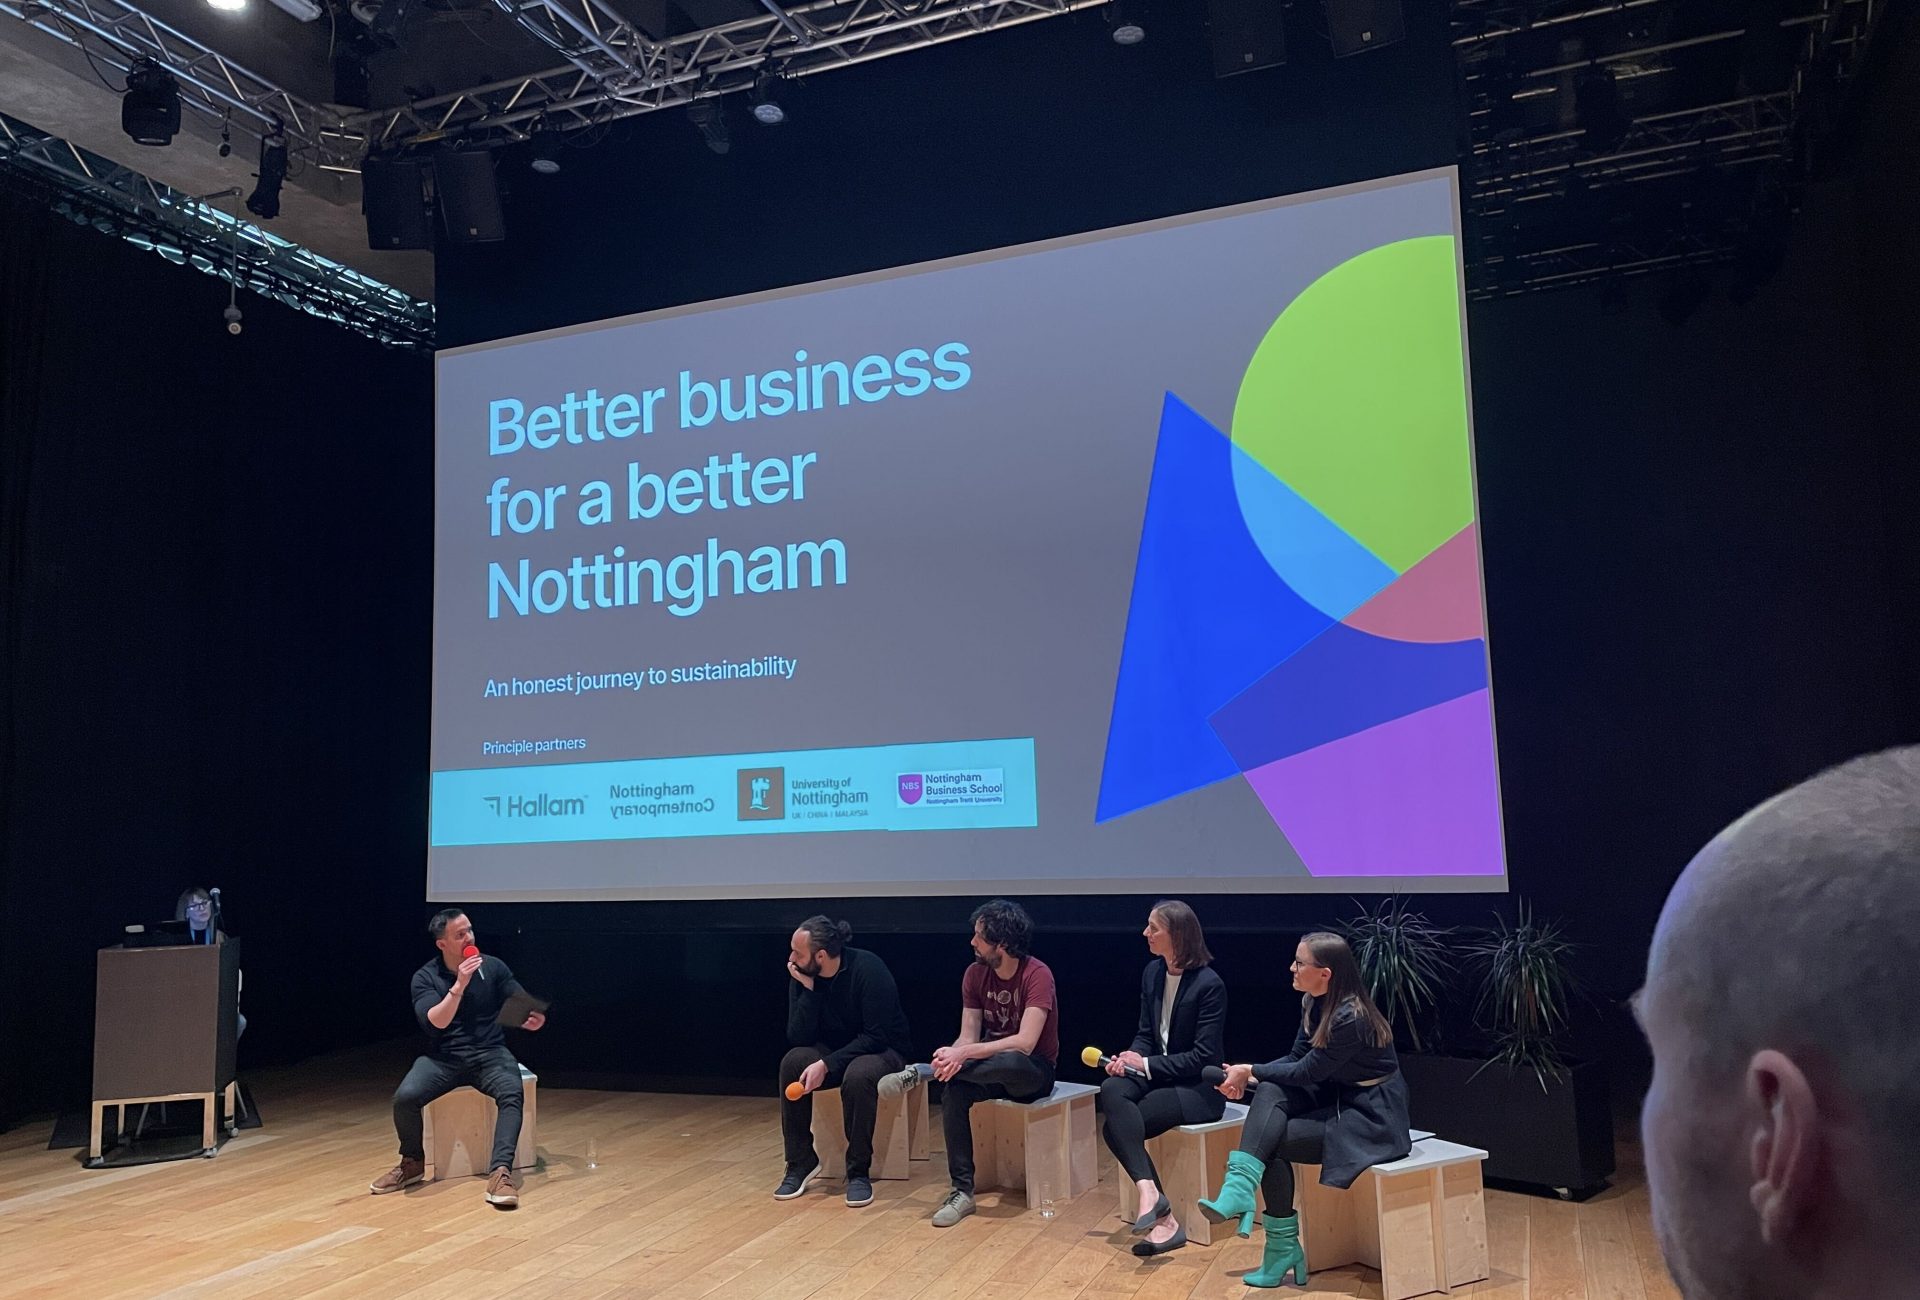 Better business for a better Nottingham: our event with Nottingham Contemporary